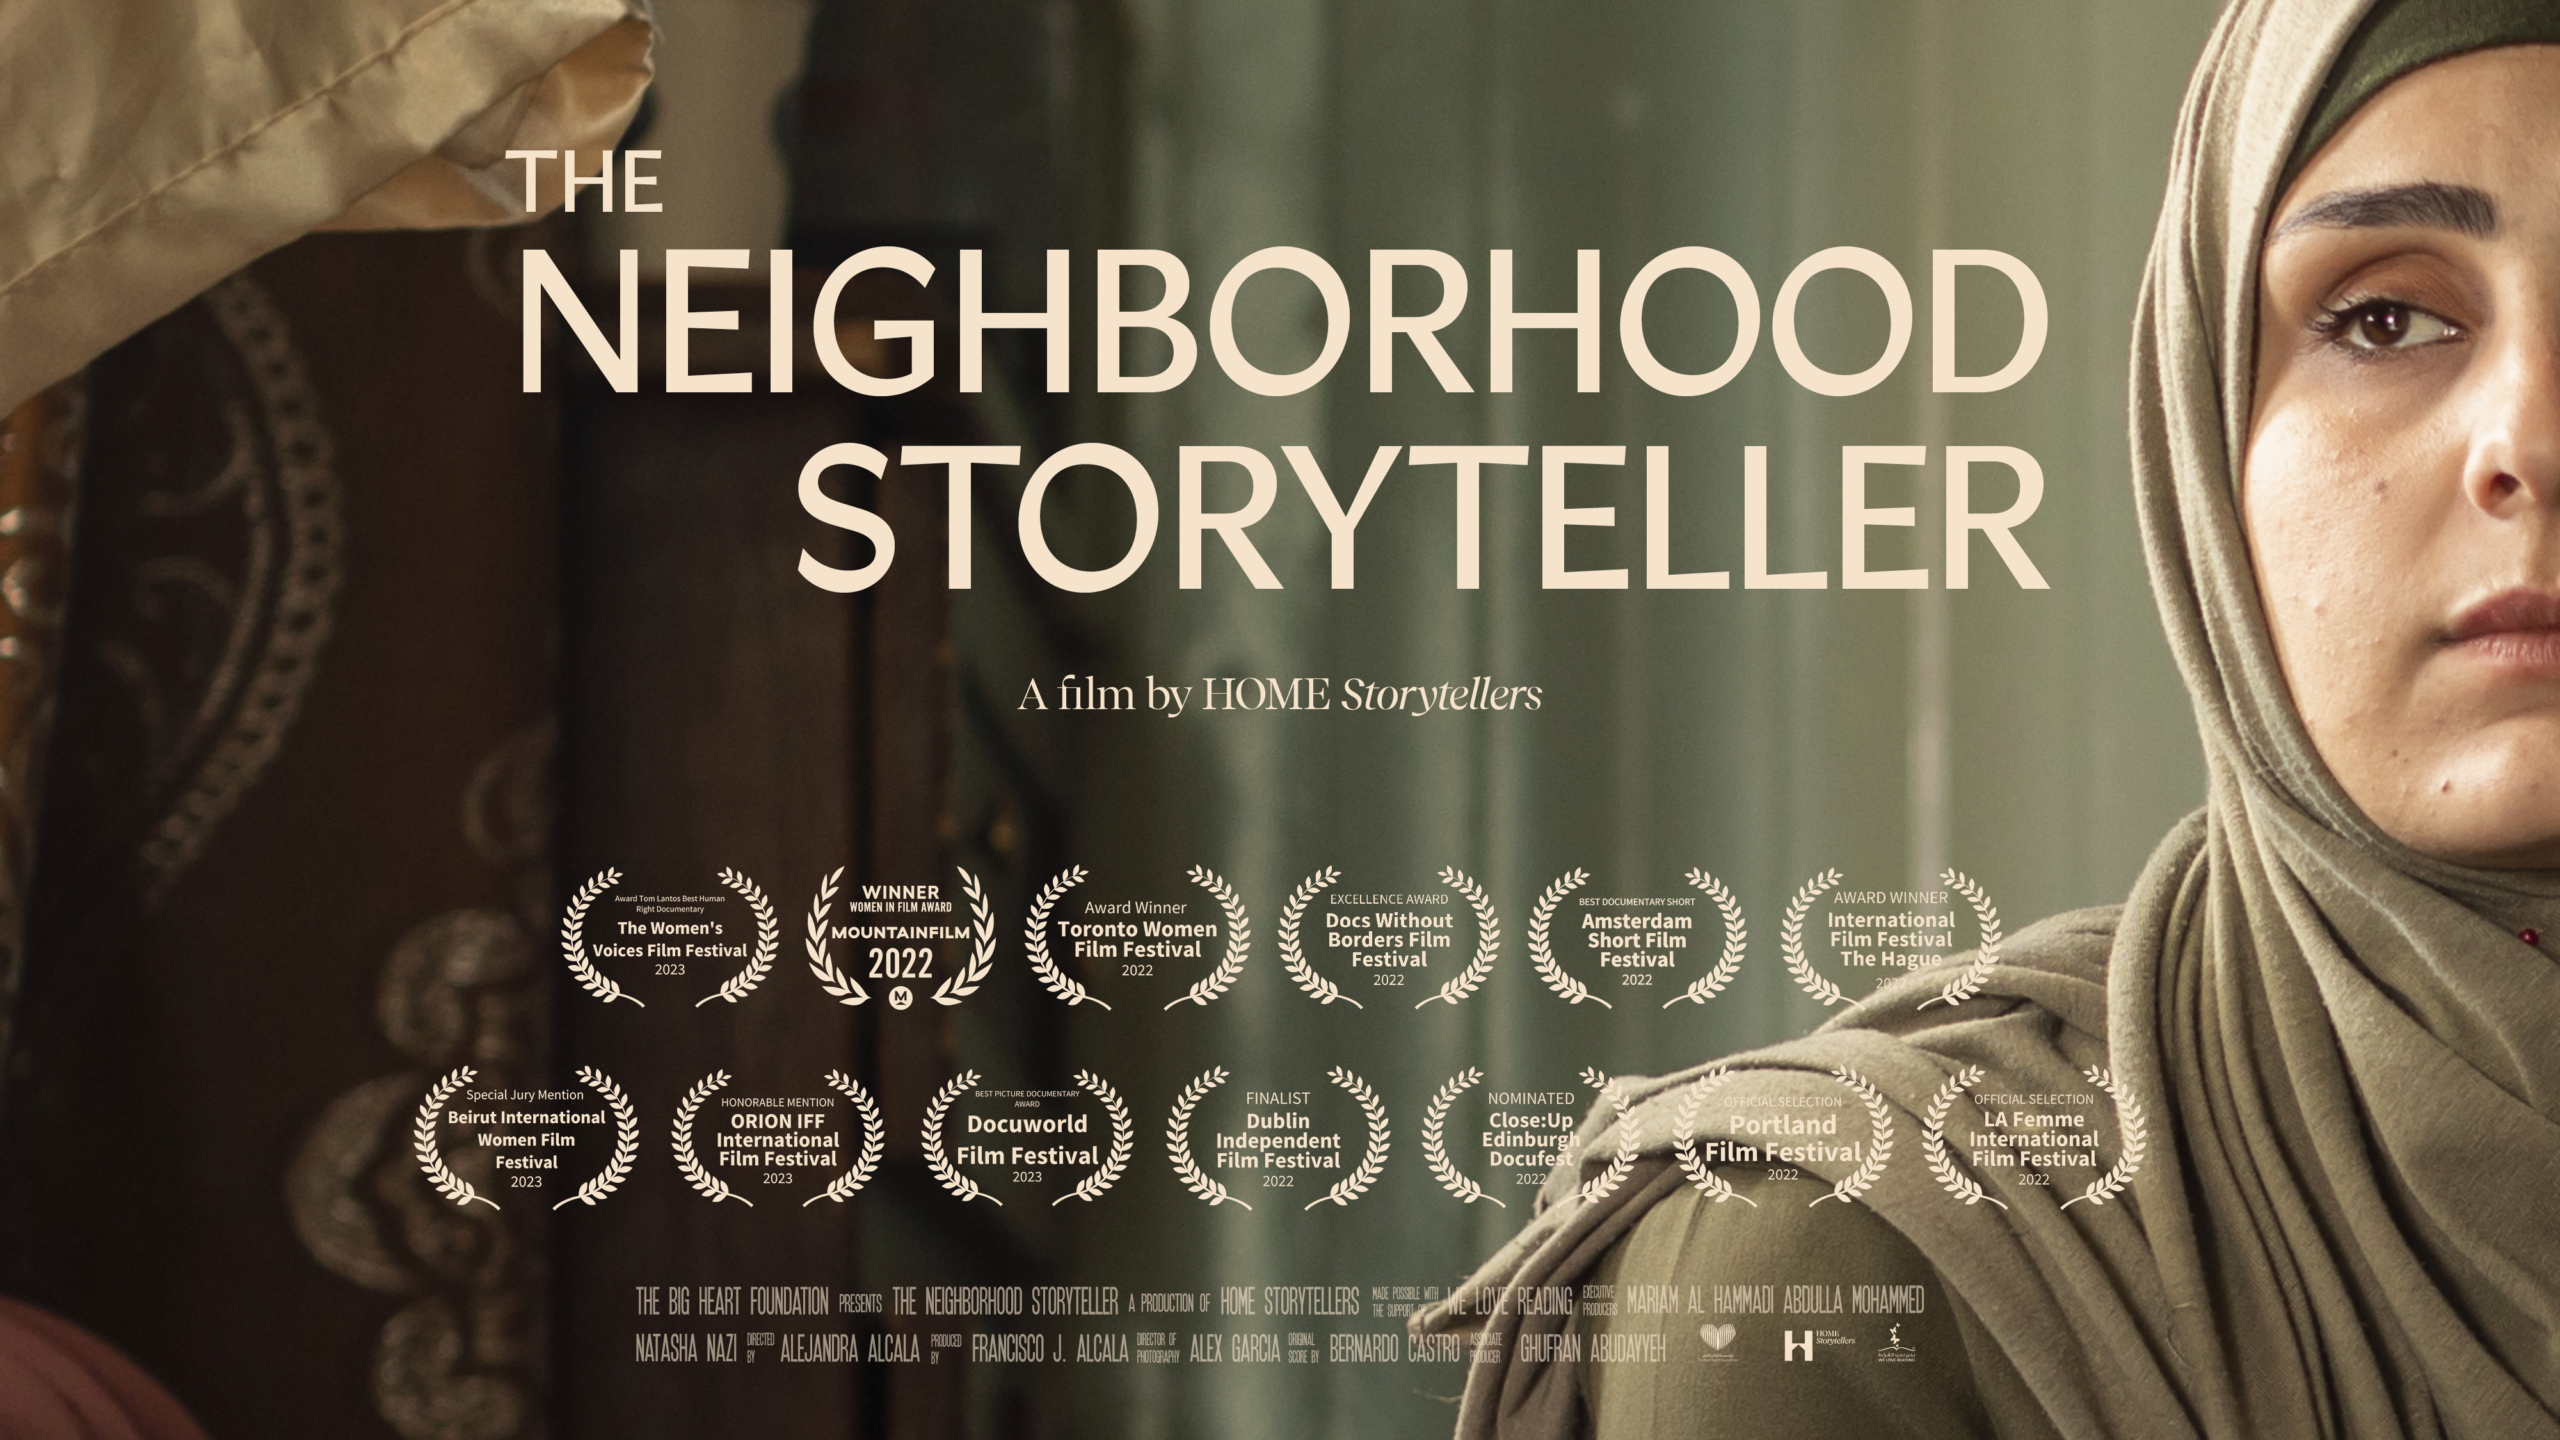 Movie poster image featuring a Muslim woman in a hijab at the edge of the frame. Film title across the center of the image reads: The Neighborhood Storyteller. Several film festival laurels are below the title.